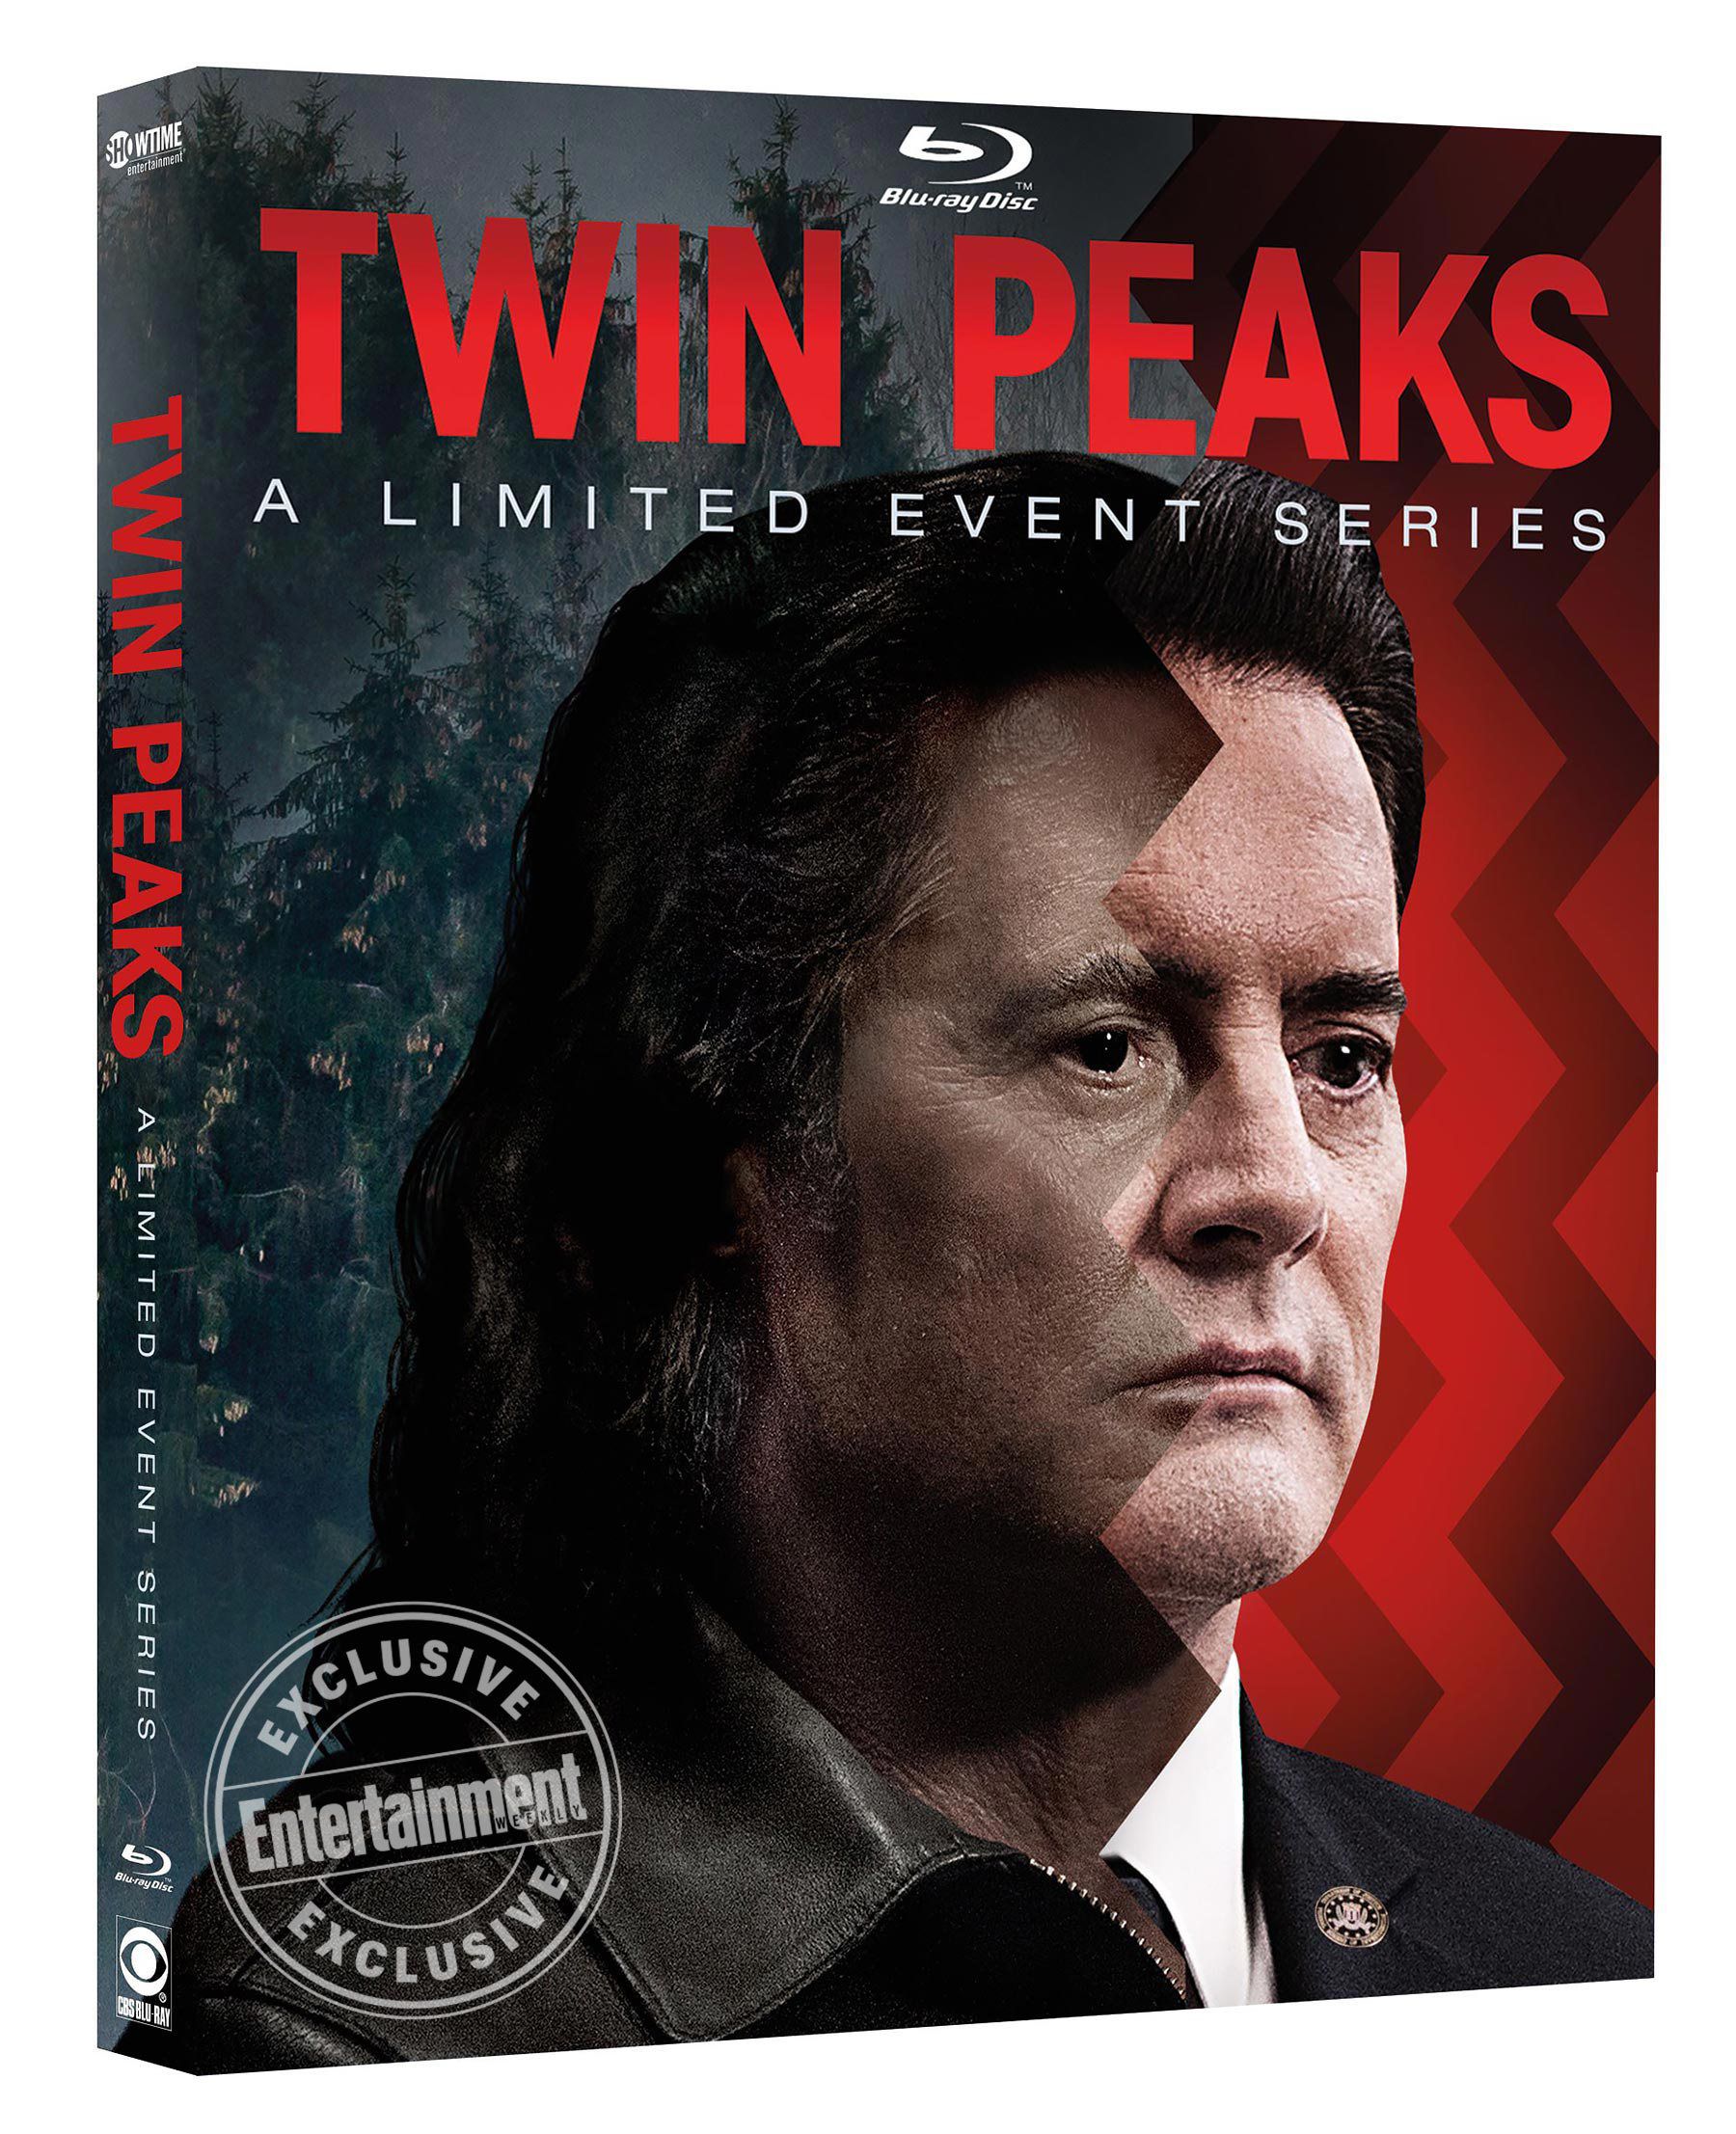 twin peaks dvd cover Twin Peaks: A Limited Event Series DVD/Blu ray includes six hours of bonus material